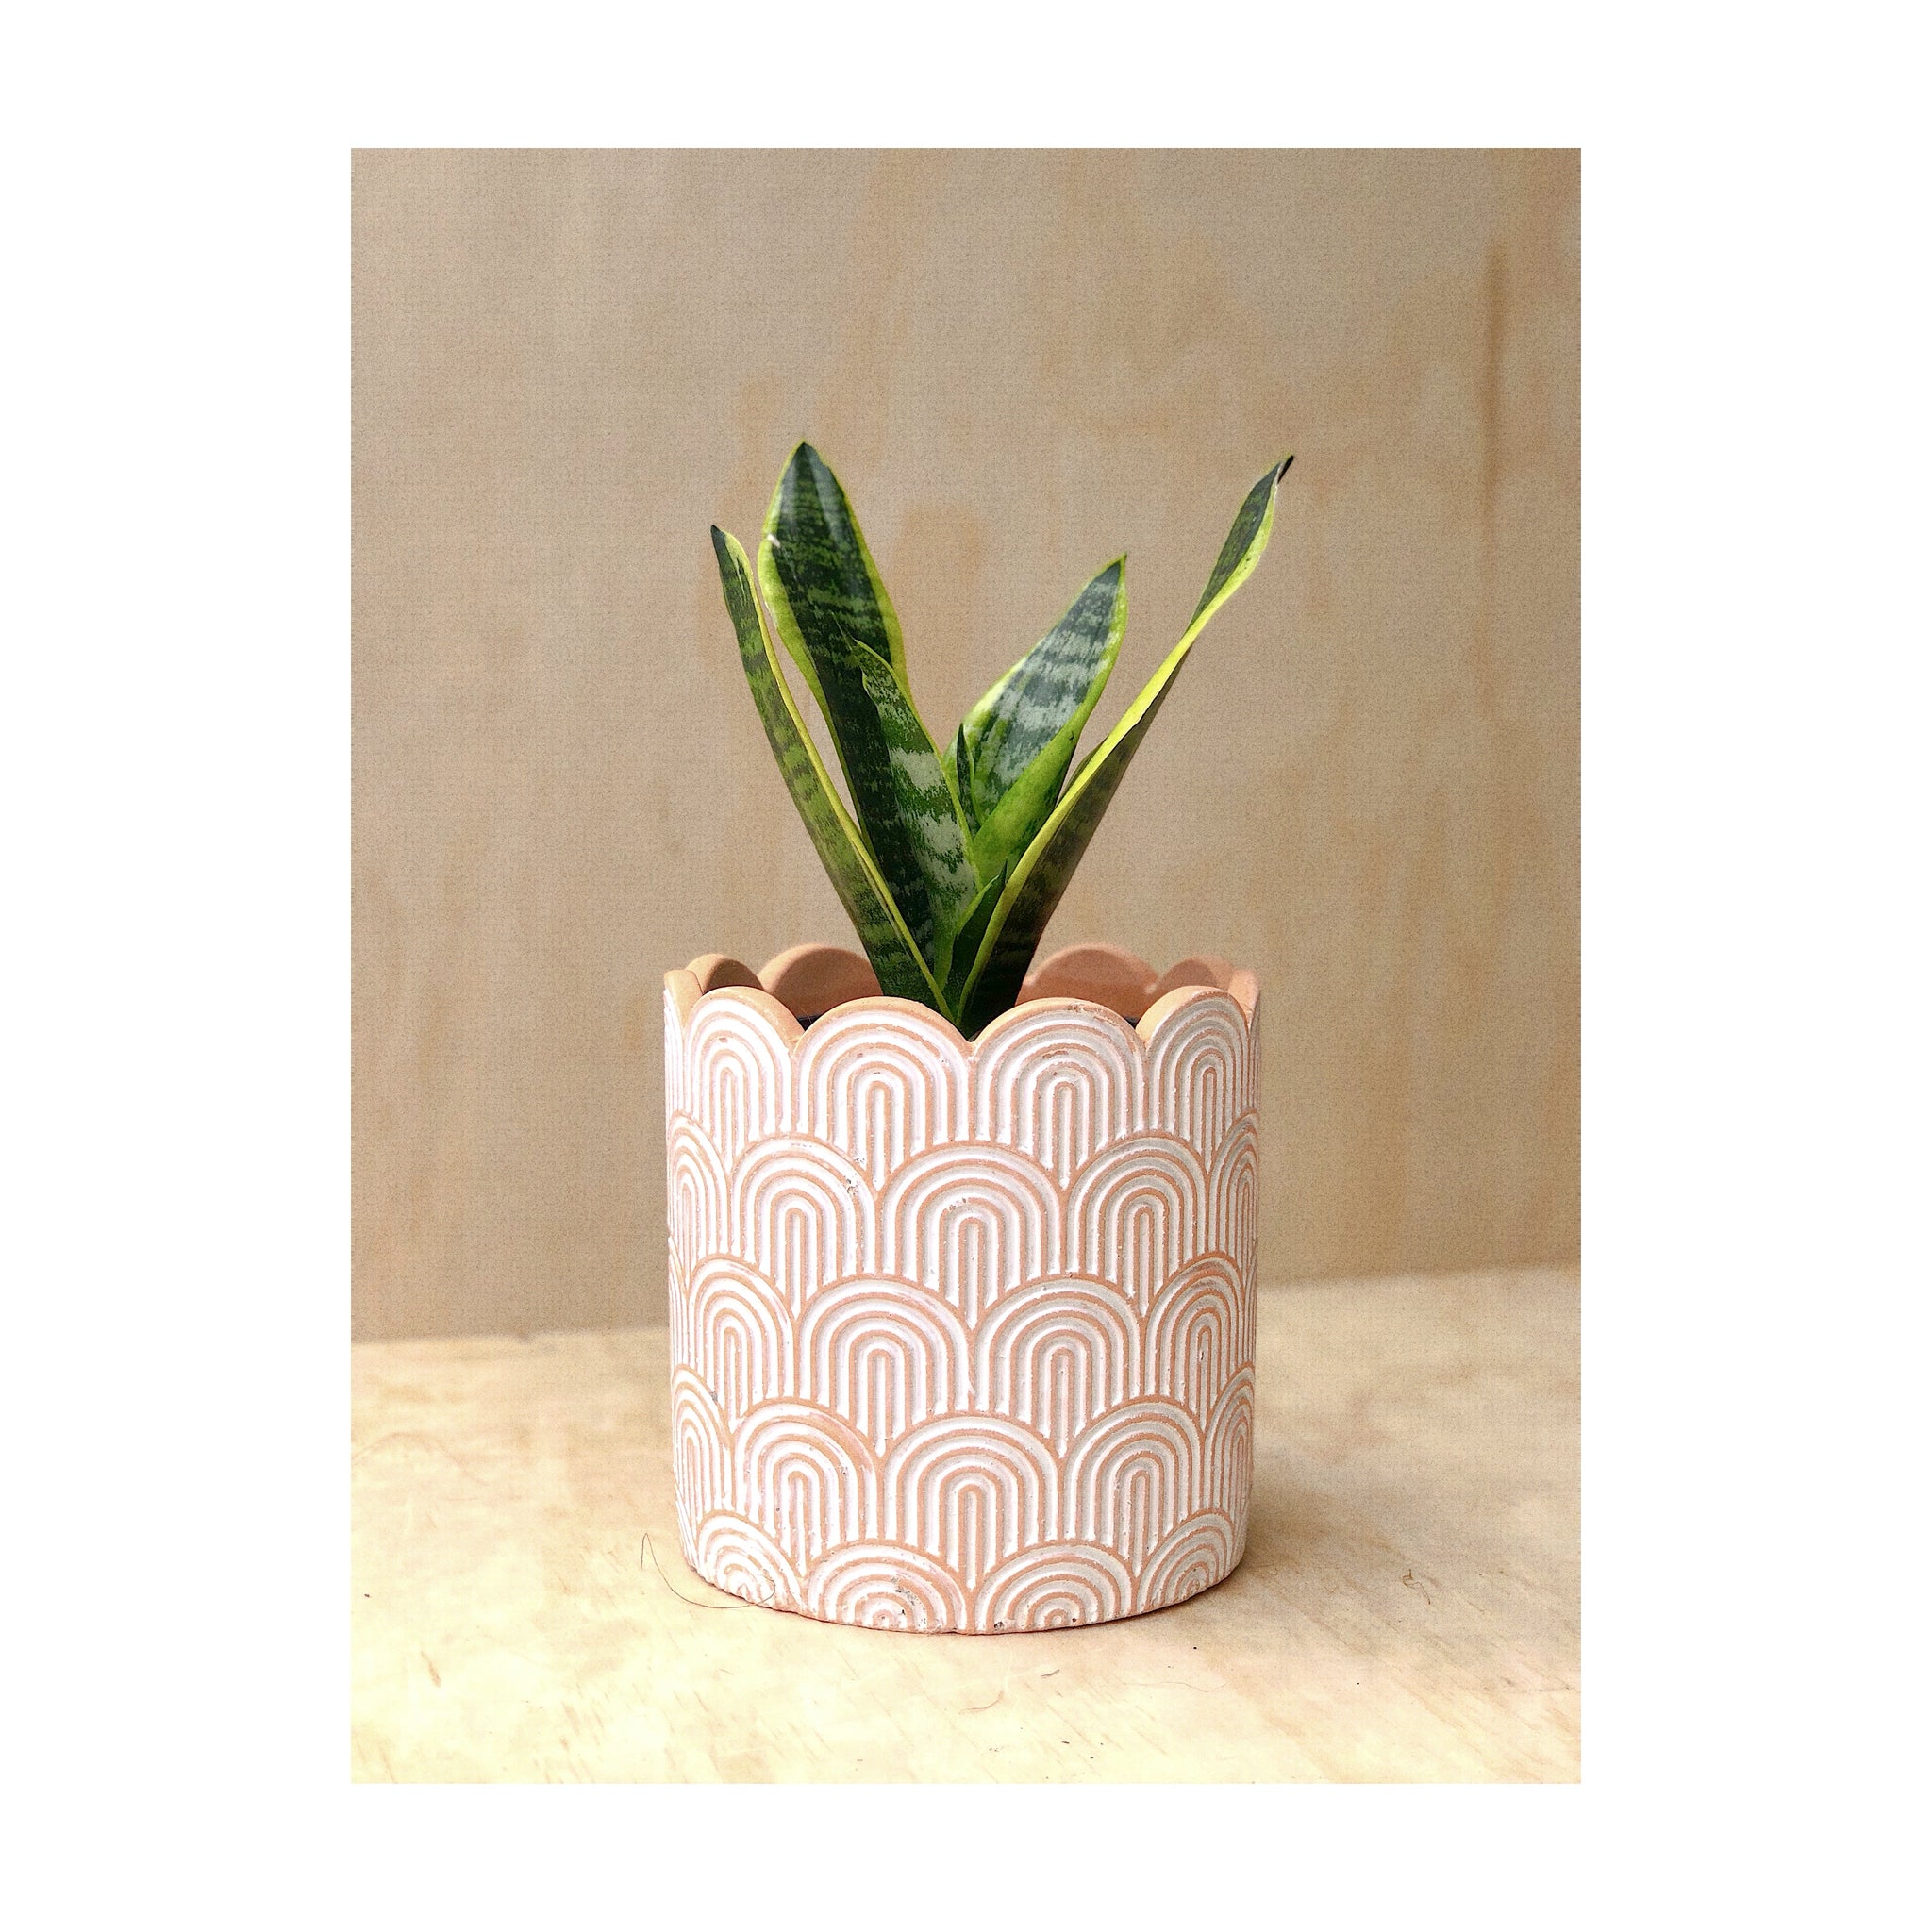 Arco Cement Decorative Indoor Plant Pot with Mother in Law's Tongue Plant (Sansevieria / Snake Plant)